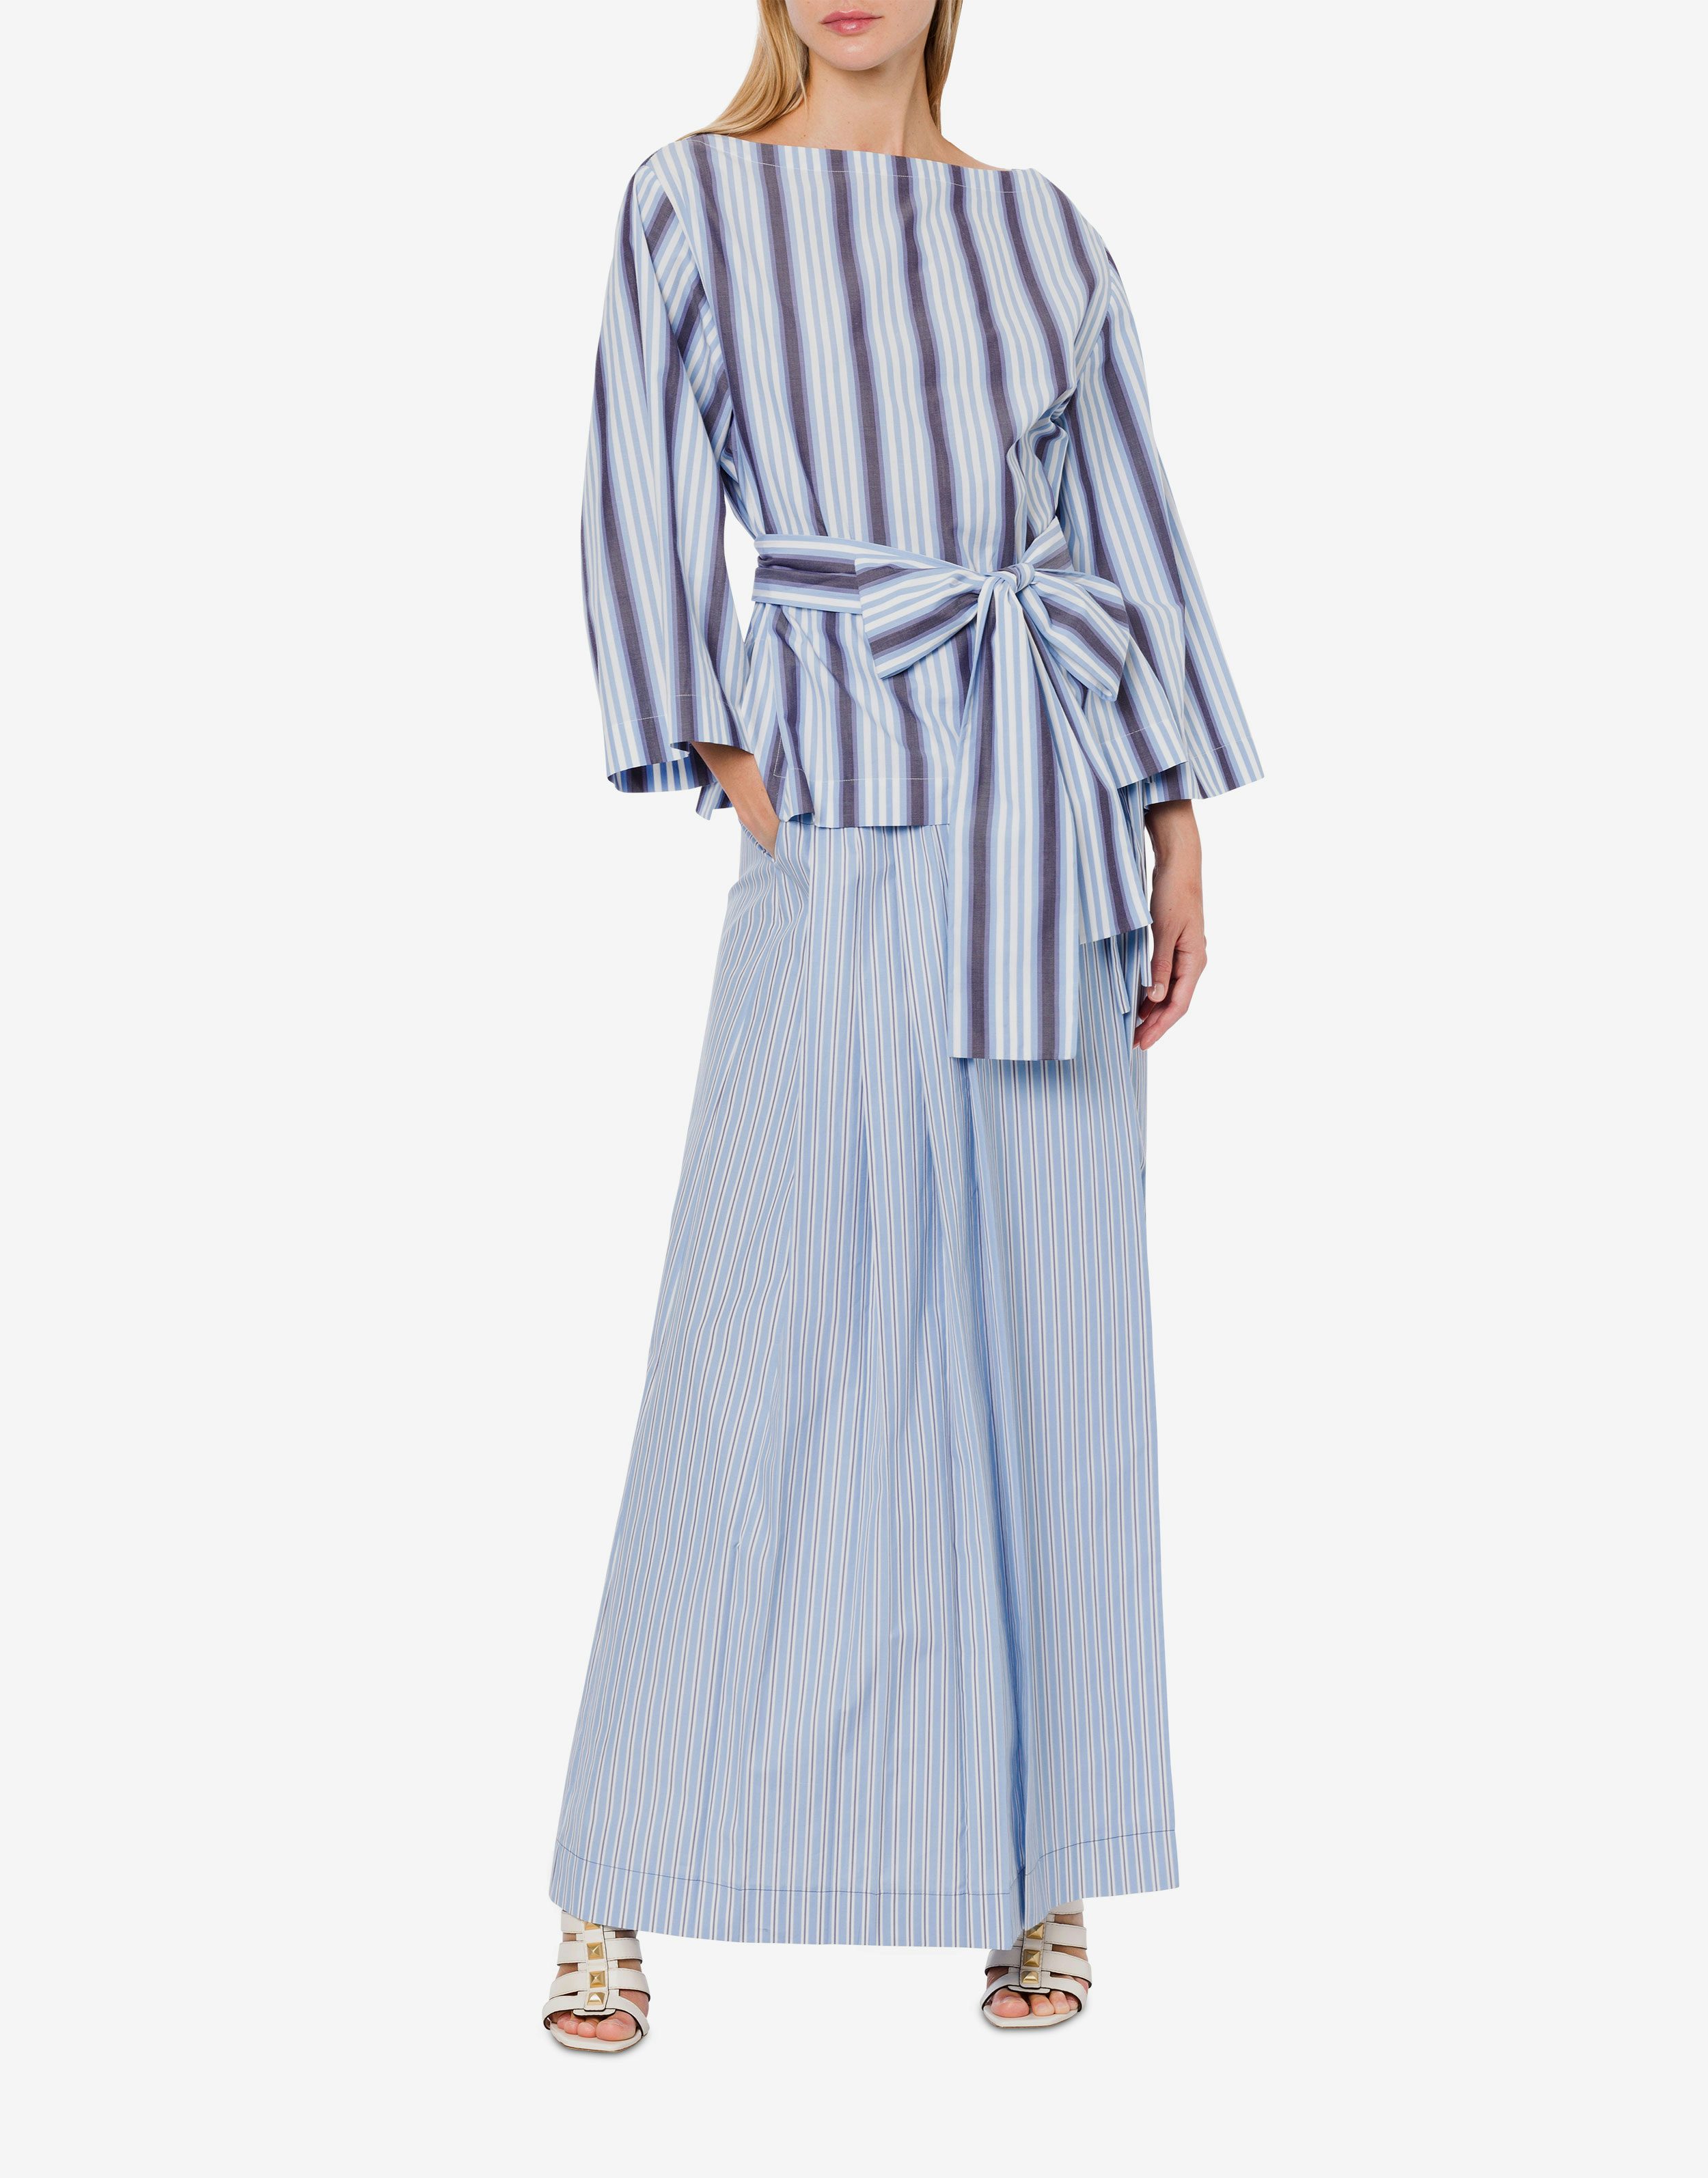 Blouse in striped poplin with sash 1